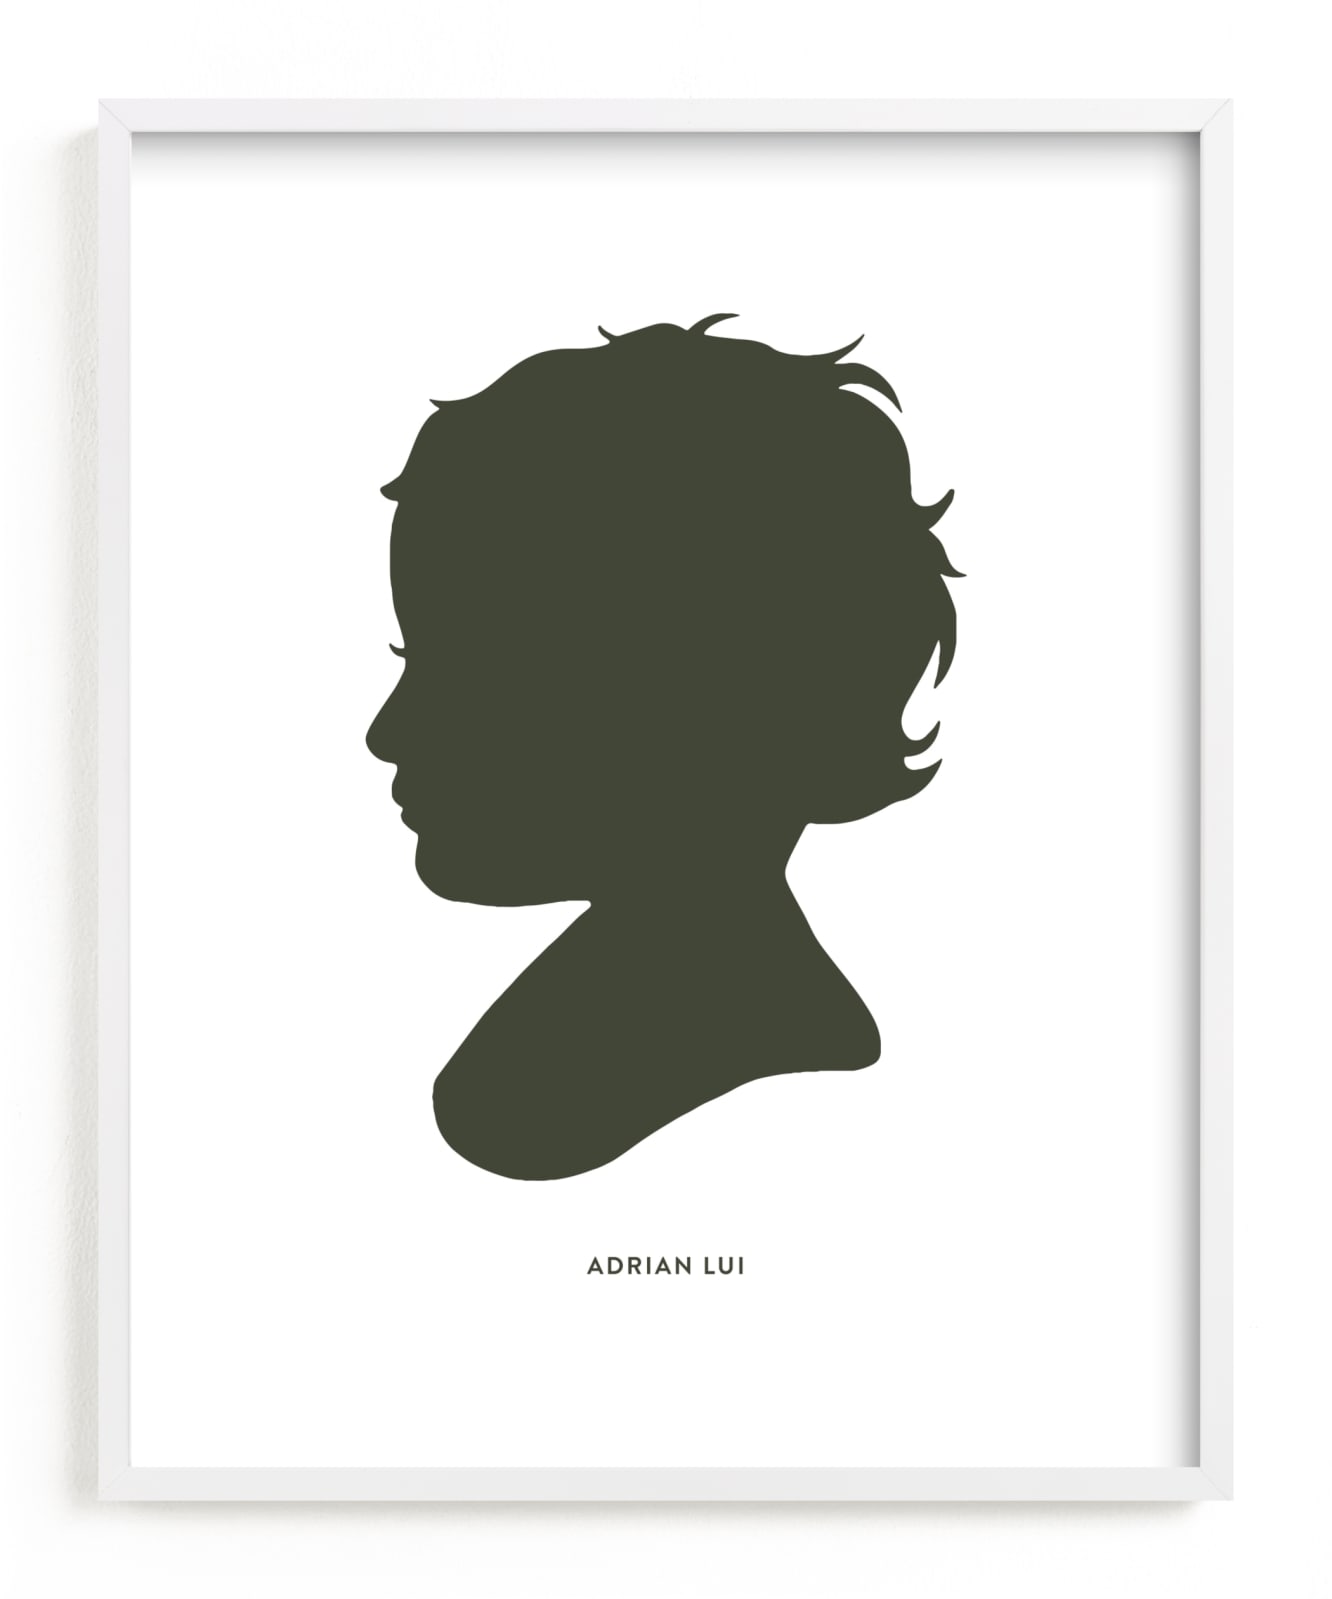 This is a green silhouette art by Minted called Custom Silhouette Art.